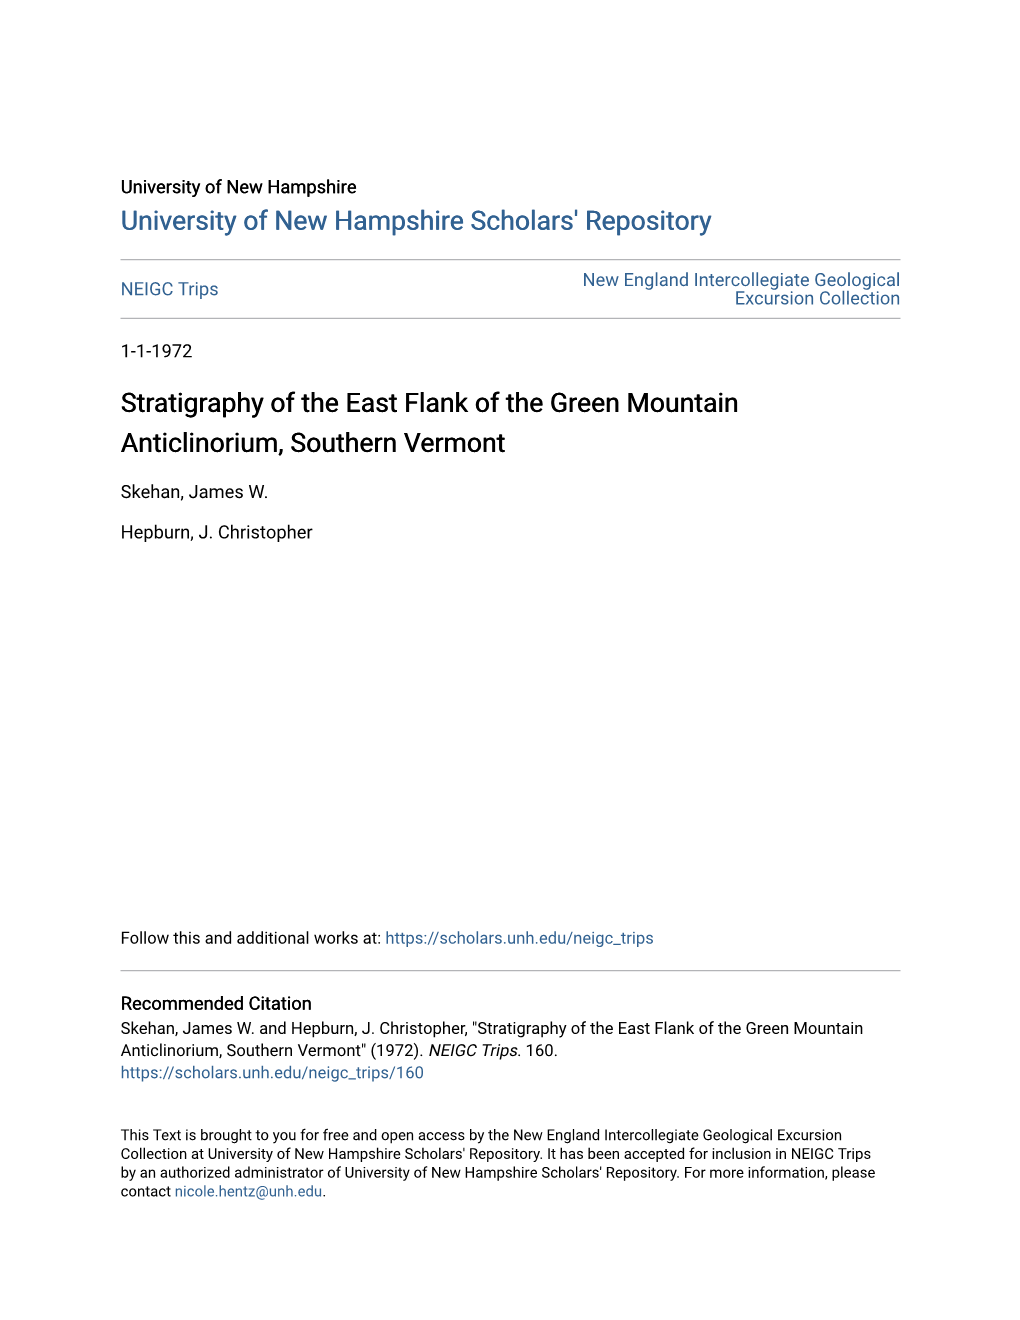 Stratigraphy of the East Flank of the Green Mountain Anticlinorium, Southern Vermont